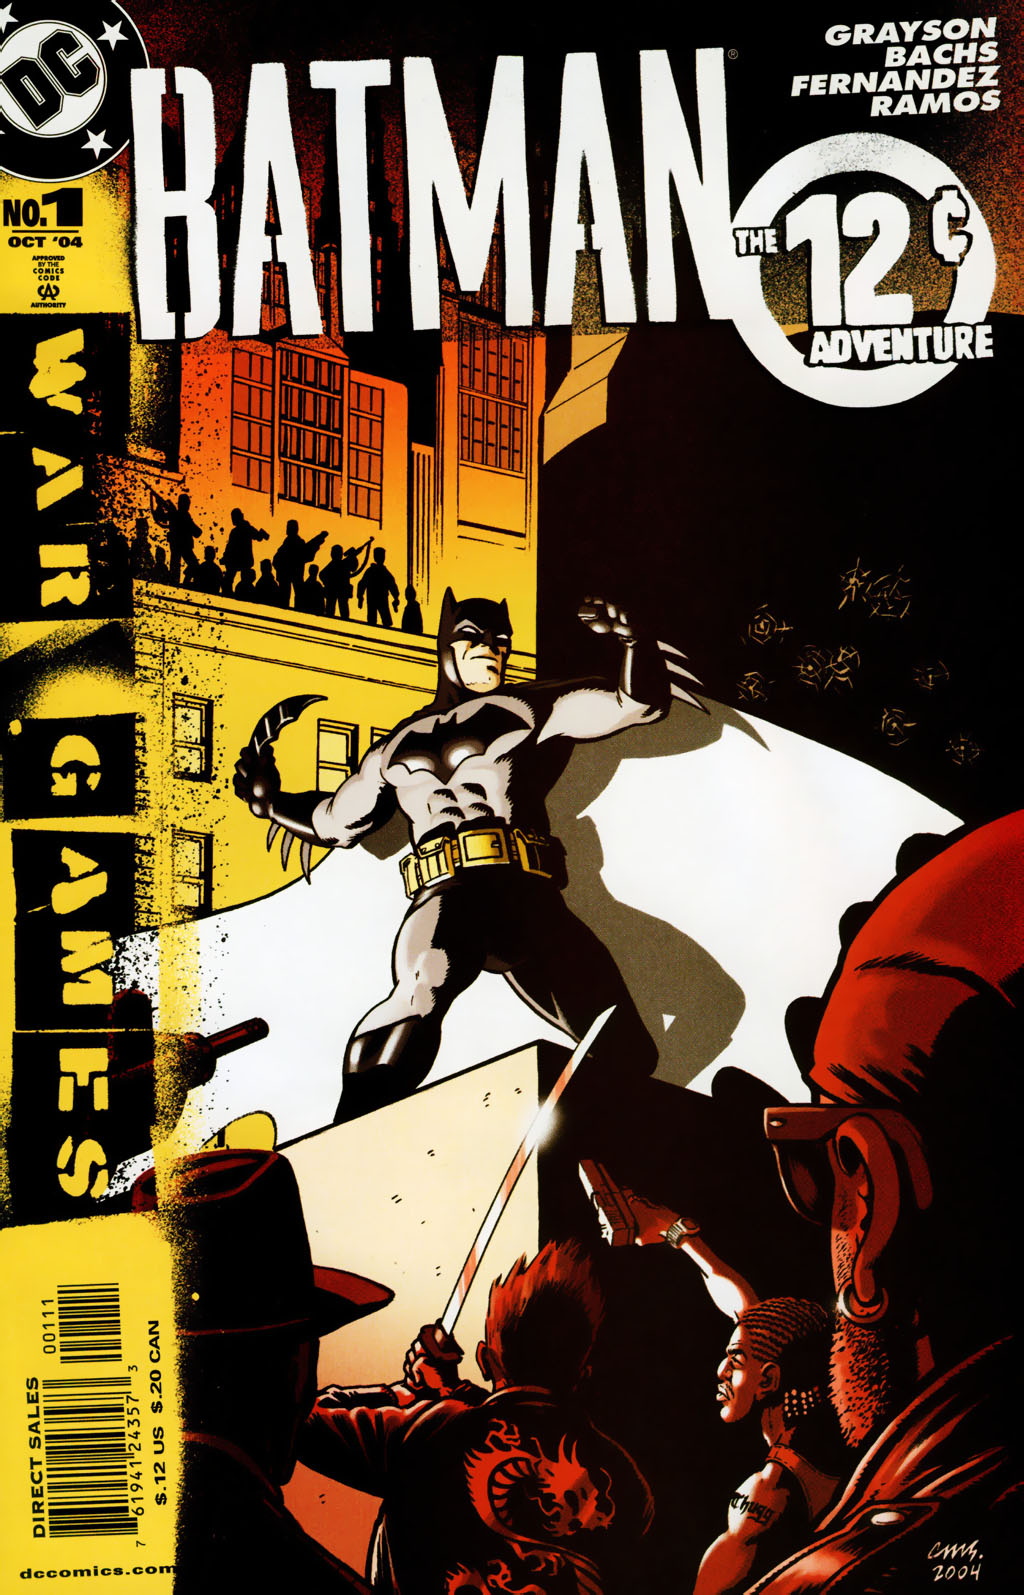 Batman War Games Act 1 Outbreak Issue 0 | Read Batman War Games Act 1  Outbreak Issue 0 comic online in high quality. Read Full Comic online for  free - Read comics